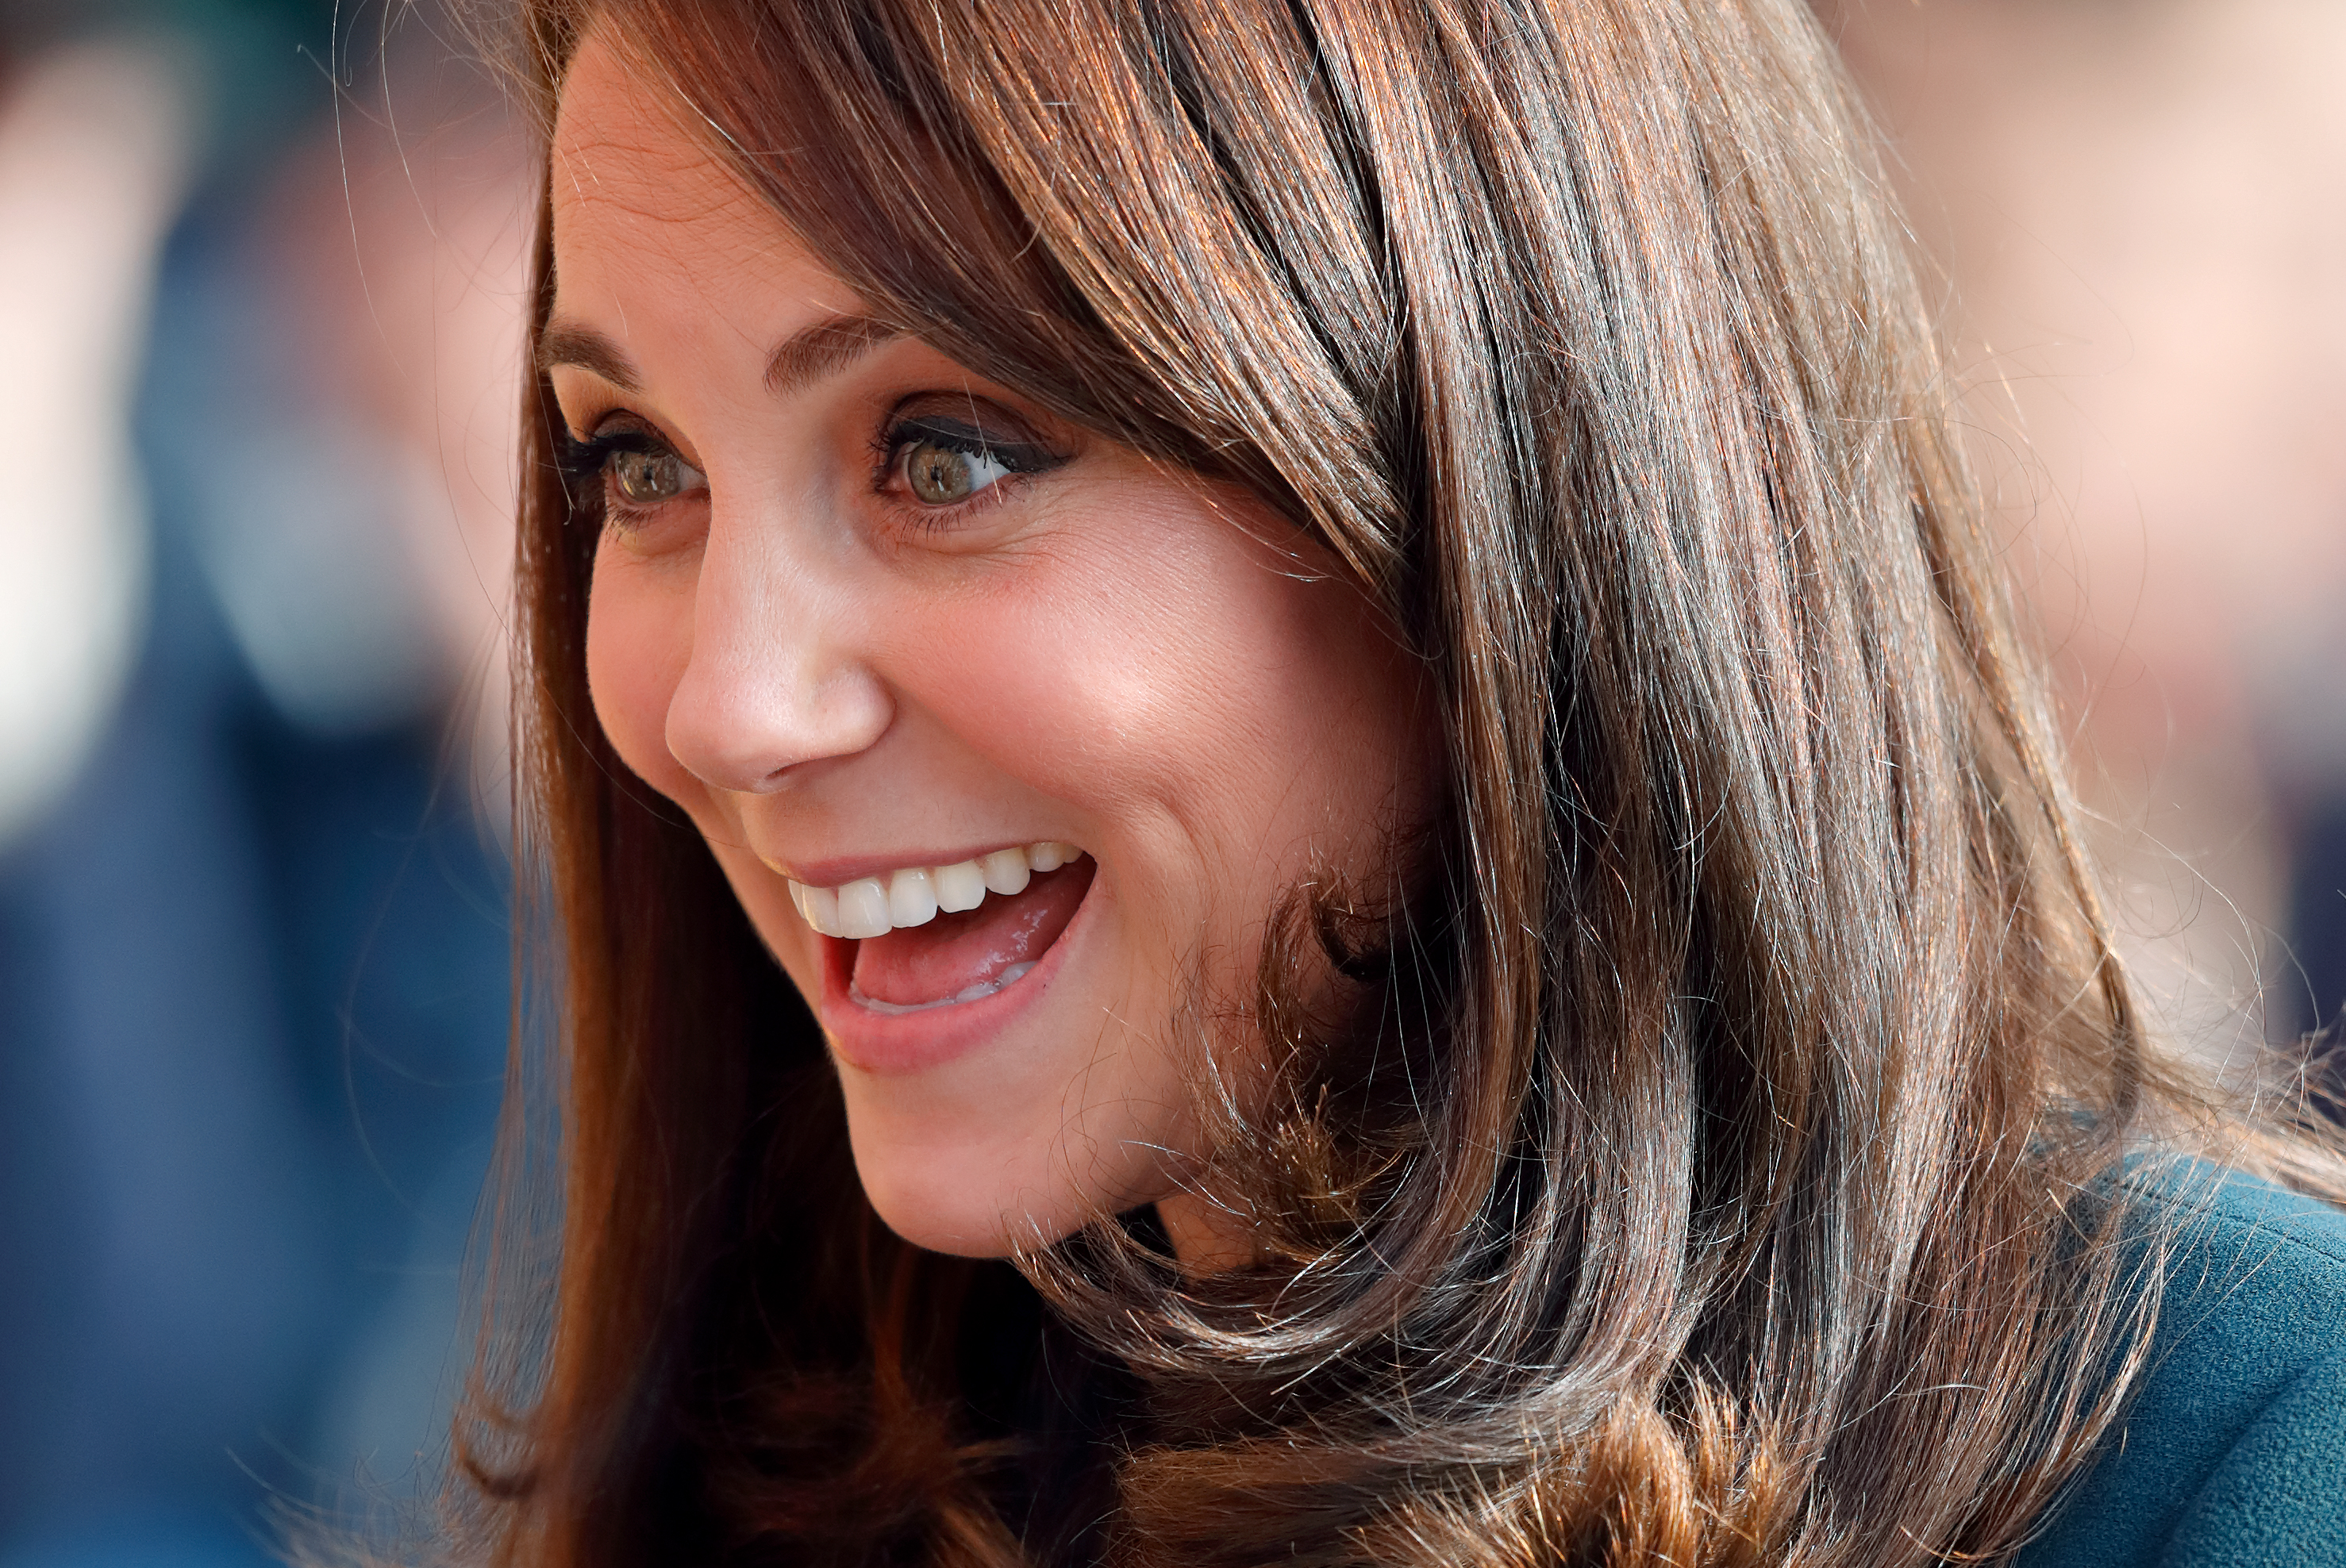 The Reason Kate Middleton Has a Large Scar On Her Head